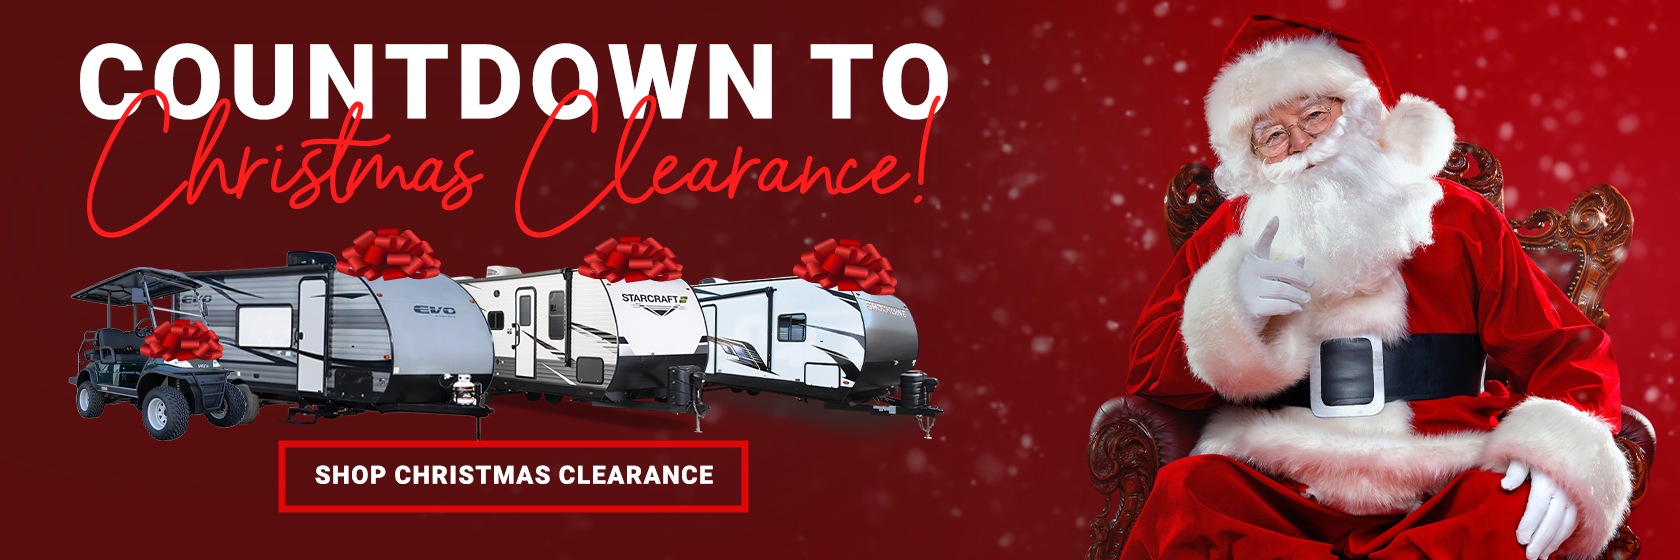 Countdown to Christmas Clearance